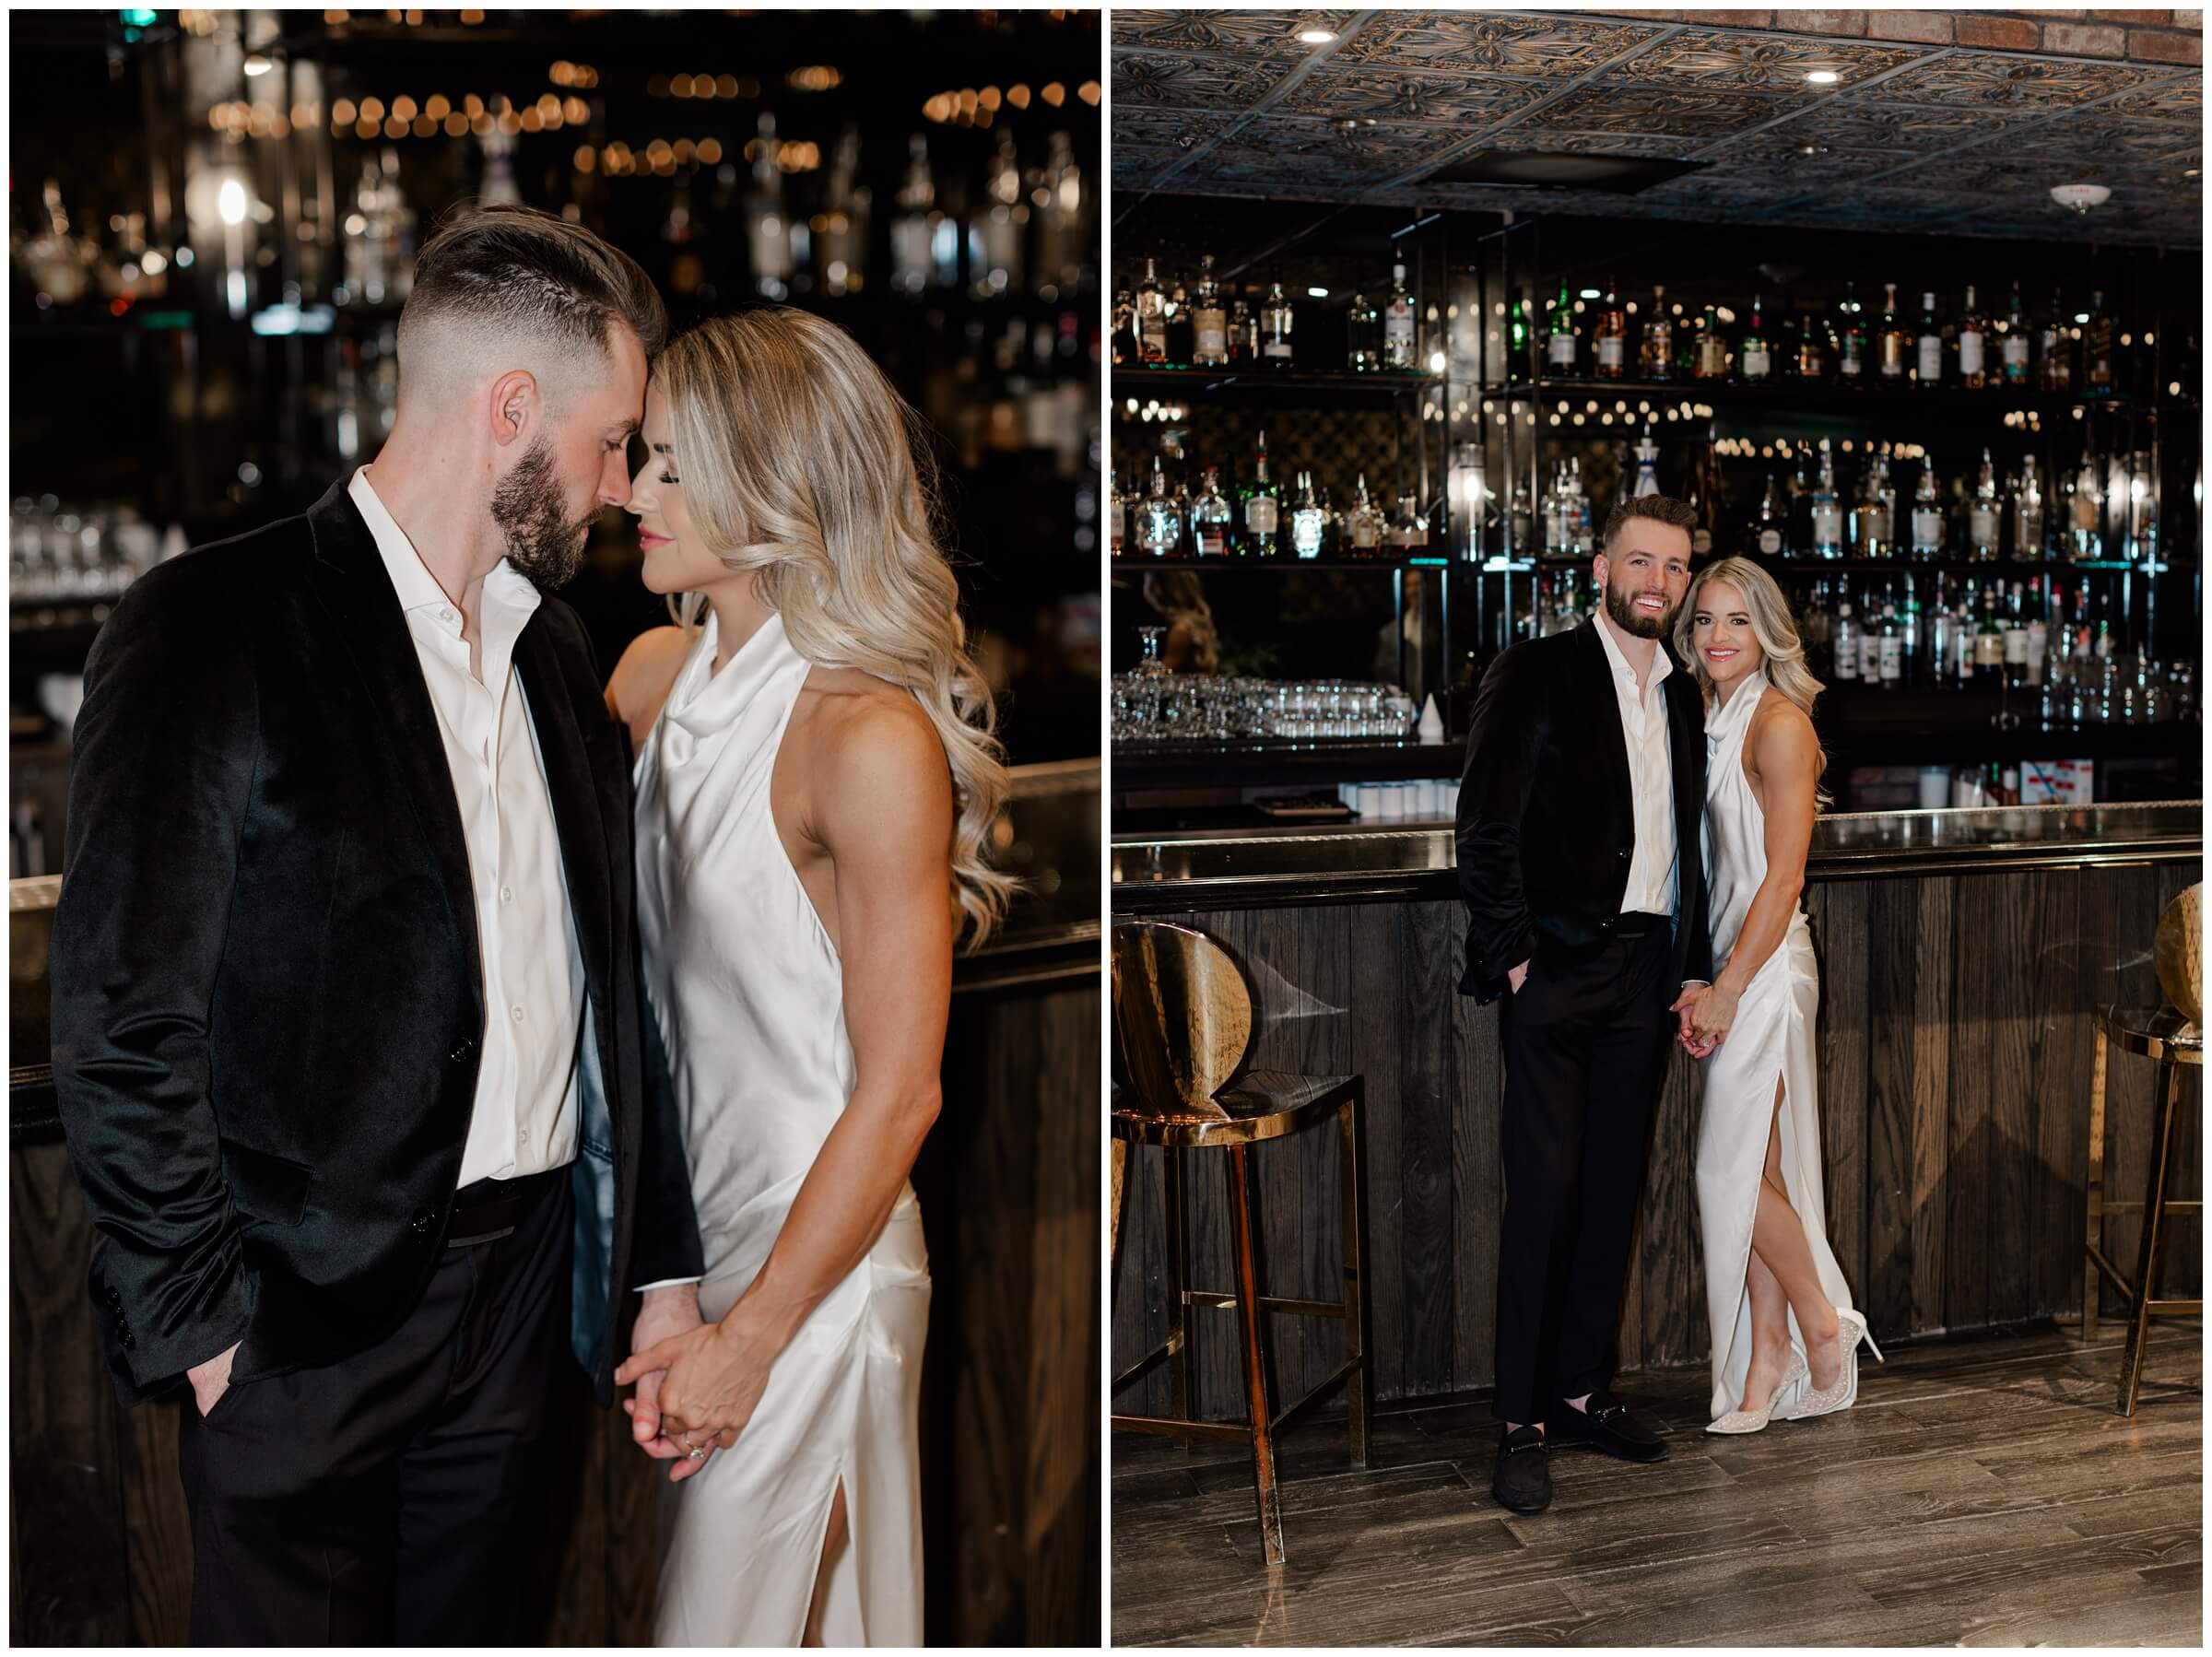 Classy engagement photos at a bar in houston